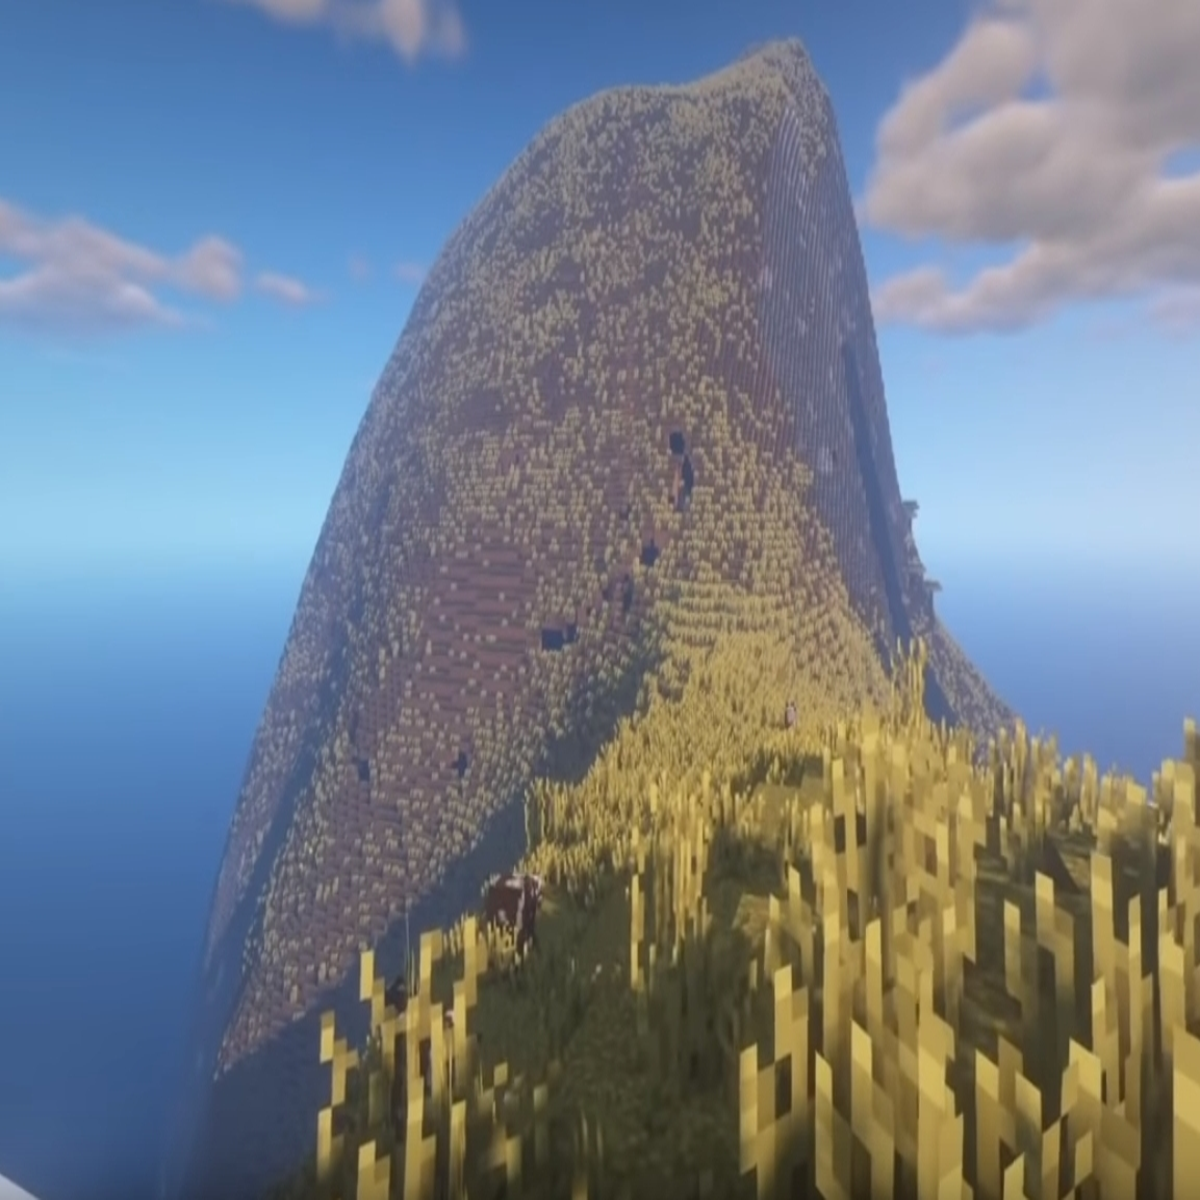 Minecraft's Build The Earth Project Is Exactly What It Sounds Like